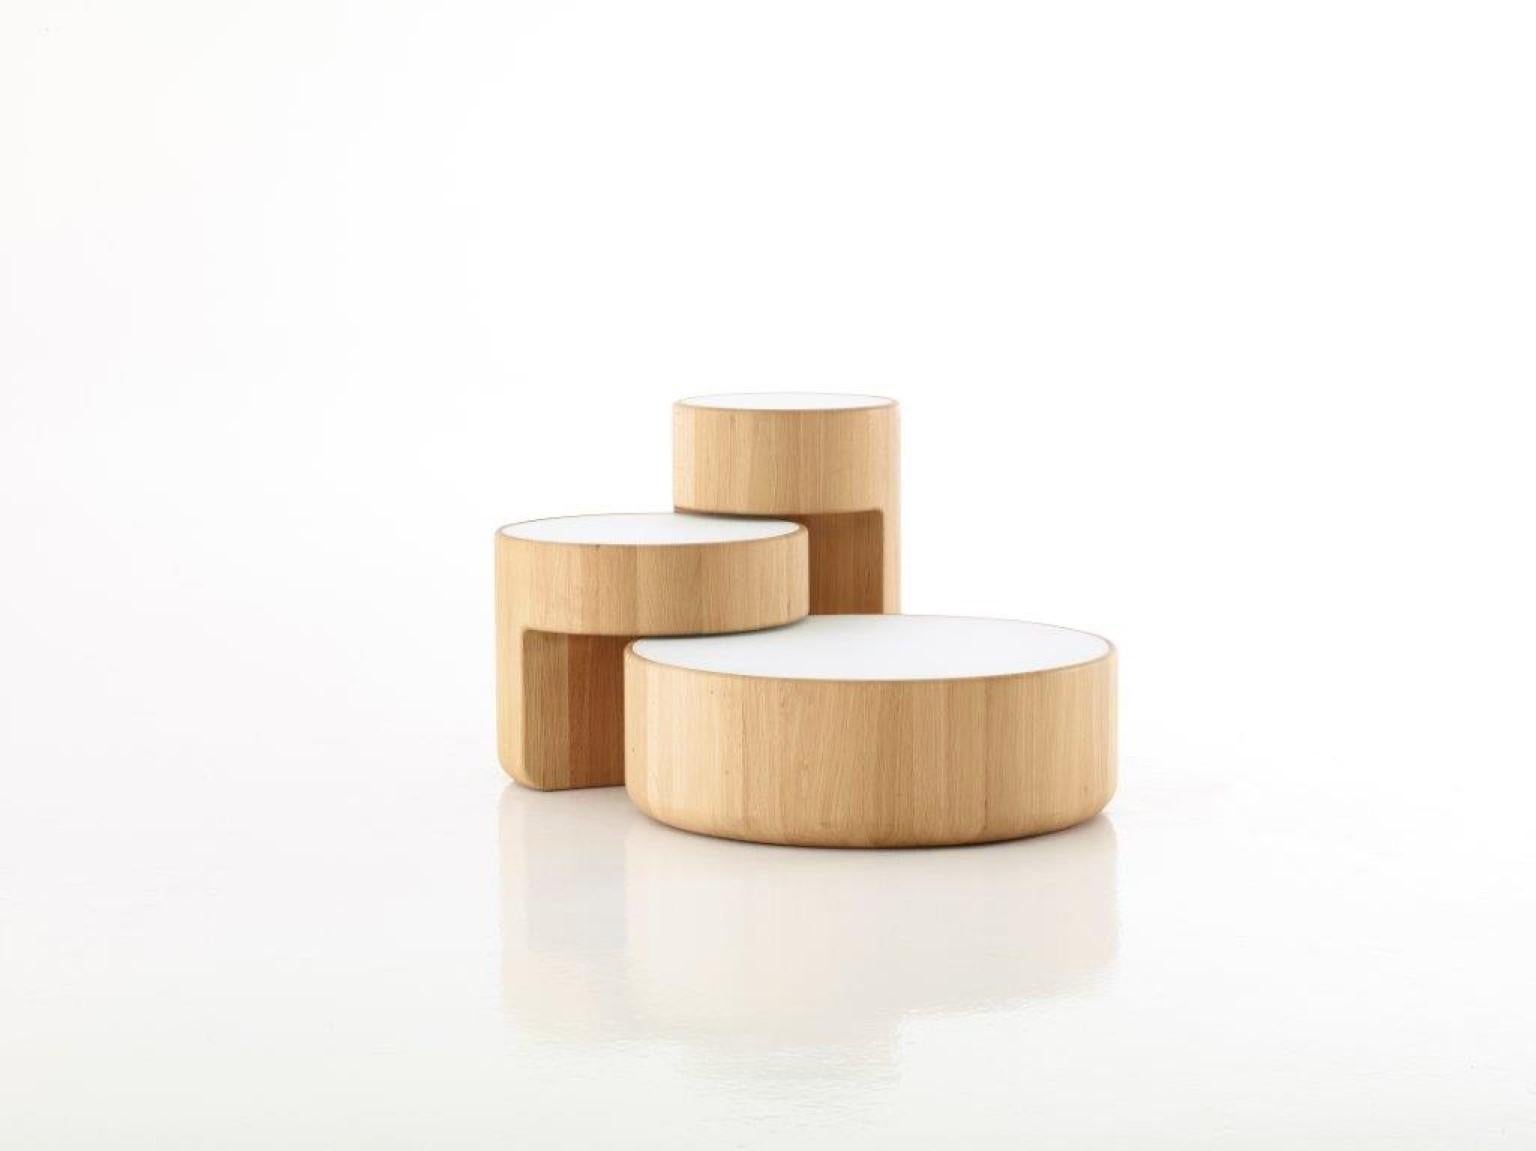 Levels set of 3 nesting tables Dan Yeffet & Lucie Koldov
Dimensions:
Ø75 x 25 cm
Ø50 x 40
Ø38 x 58
Materials: Solid oak, Oak tainted black & Marble Calacatta, natural oiled.
Inlays: glass (4mm), mat black/white or marble (20mm)


Set of 3